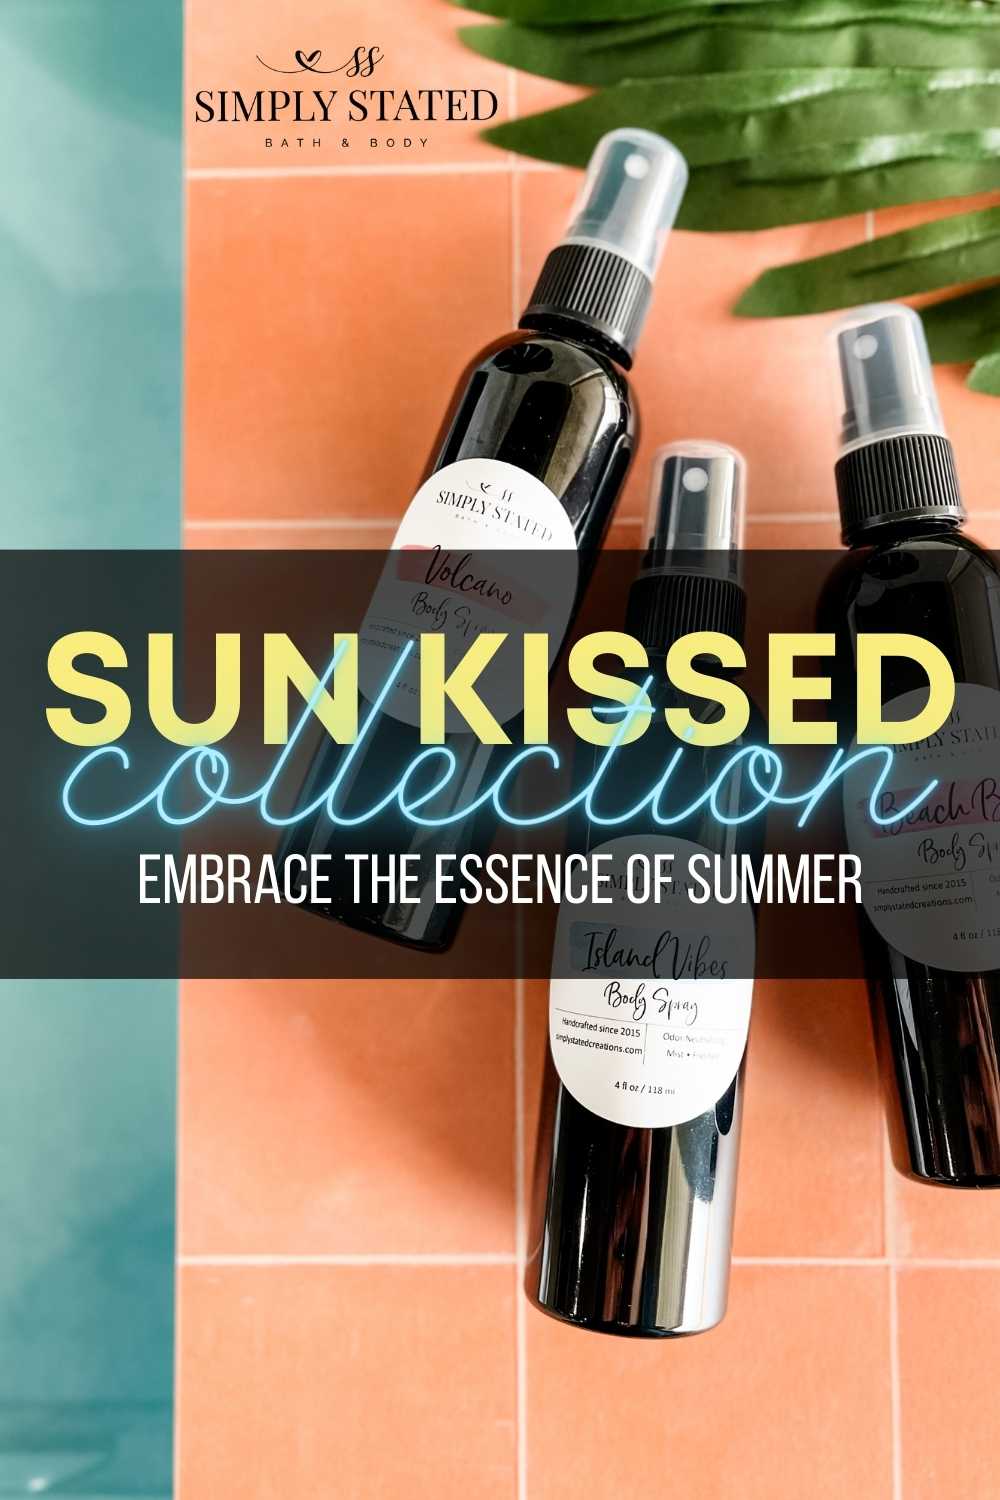 Introducing Our Sun Kissed Collection: Embrace the Essence of Summer